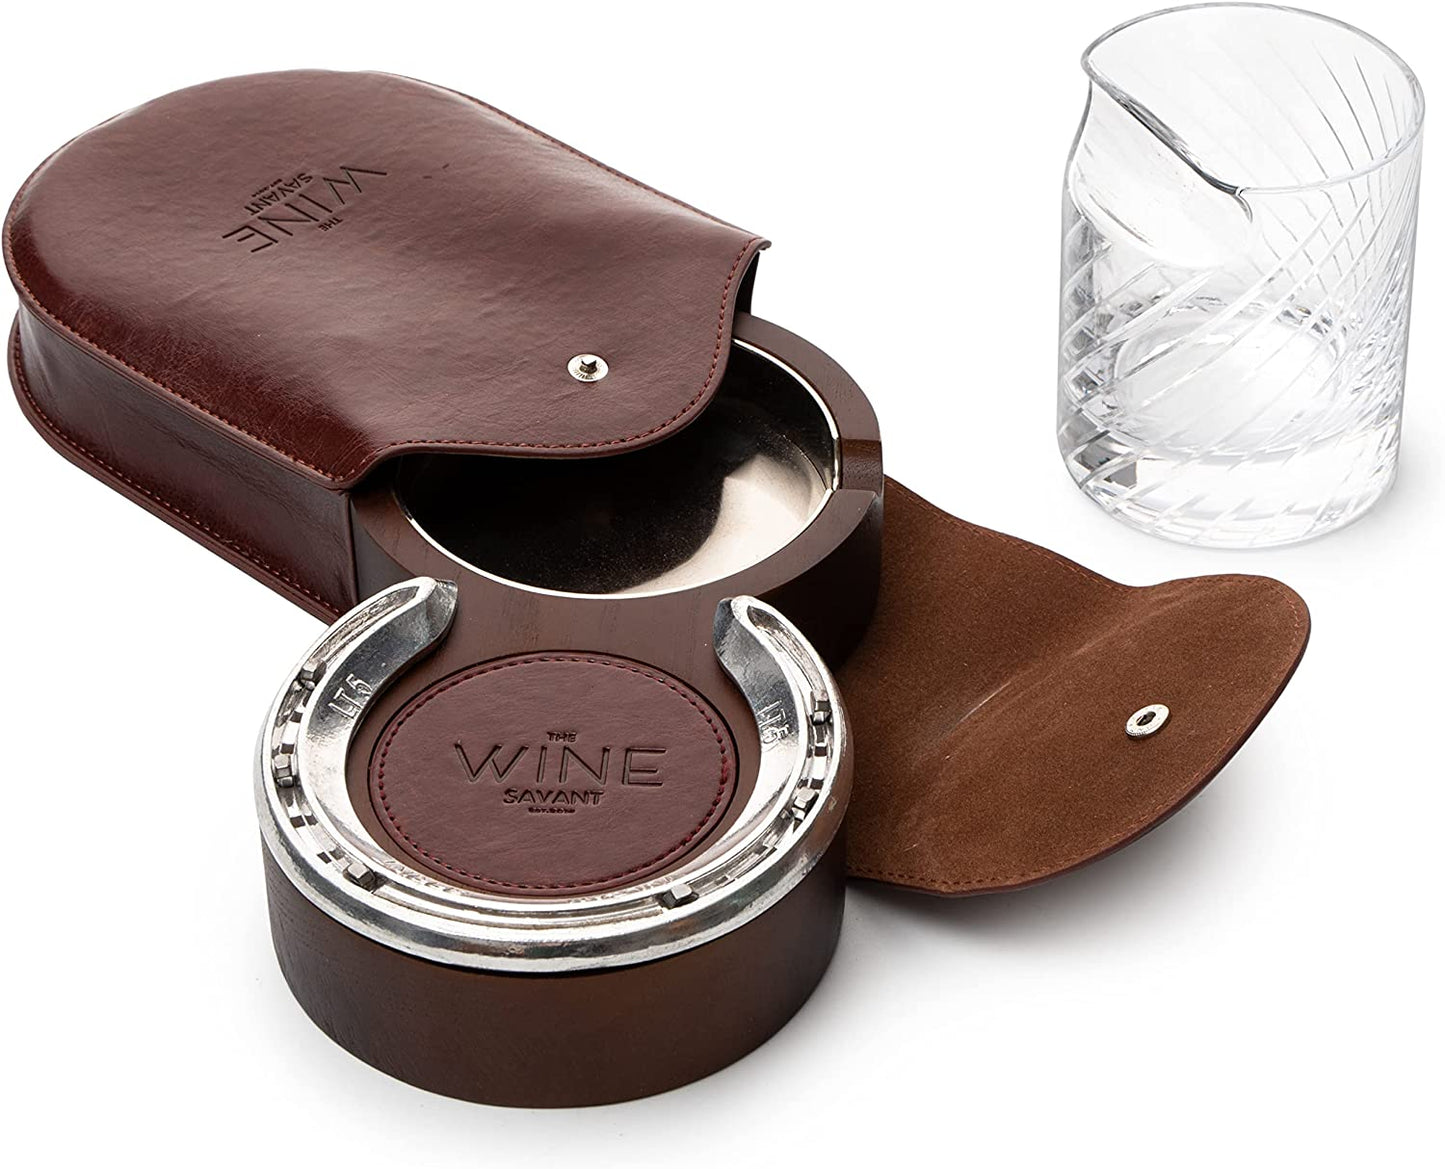 The Wine Savant Luxurious Cigar Glass - In A Leather Horseshoe Storage Case Whiskey Glassware with Cigar Holder - 10oz Cigar Holder Whiskey, Ash Tray - Dad, Men Home Office, Leather Gifts-4